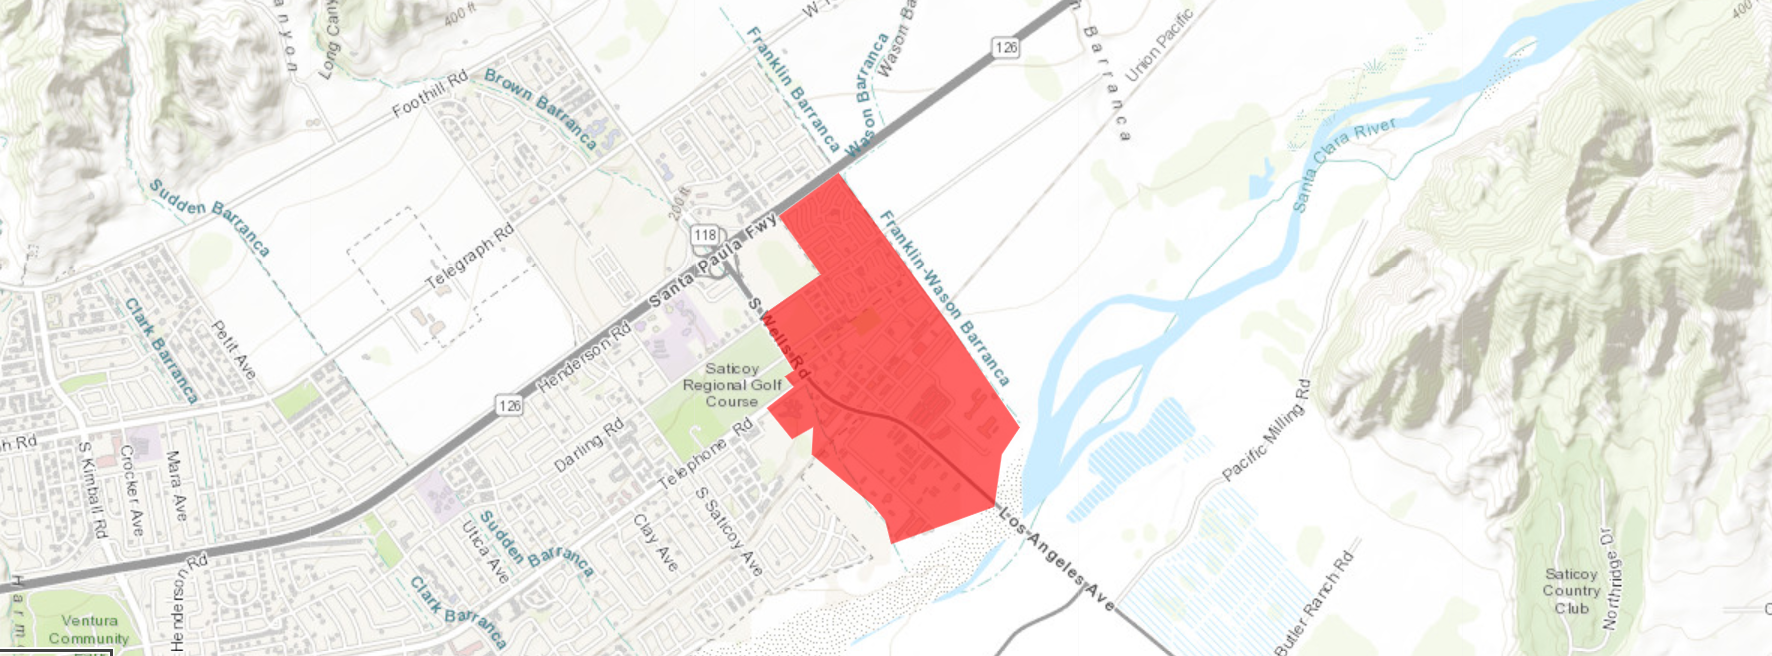 This was the area of Ventura under a boil water order after a water line break on Wednesday.